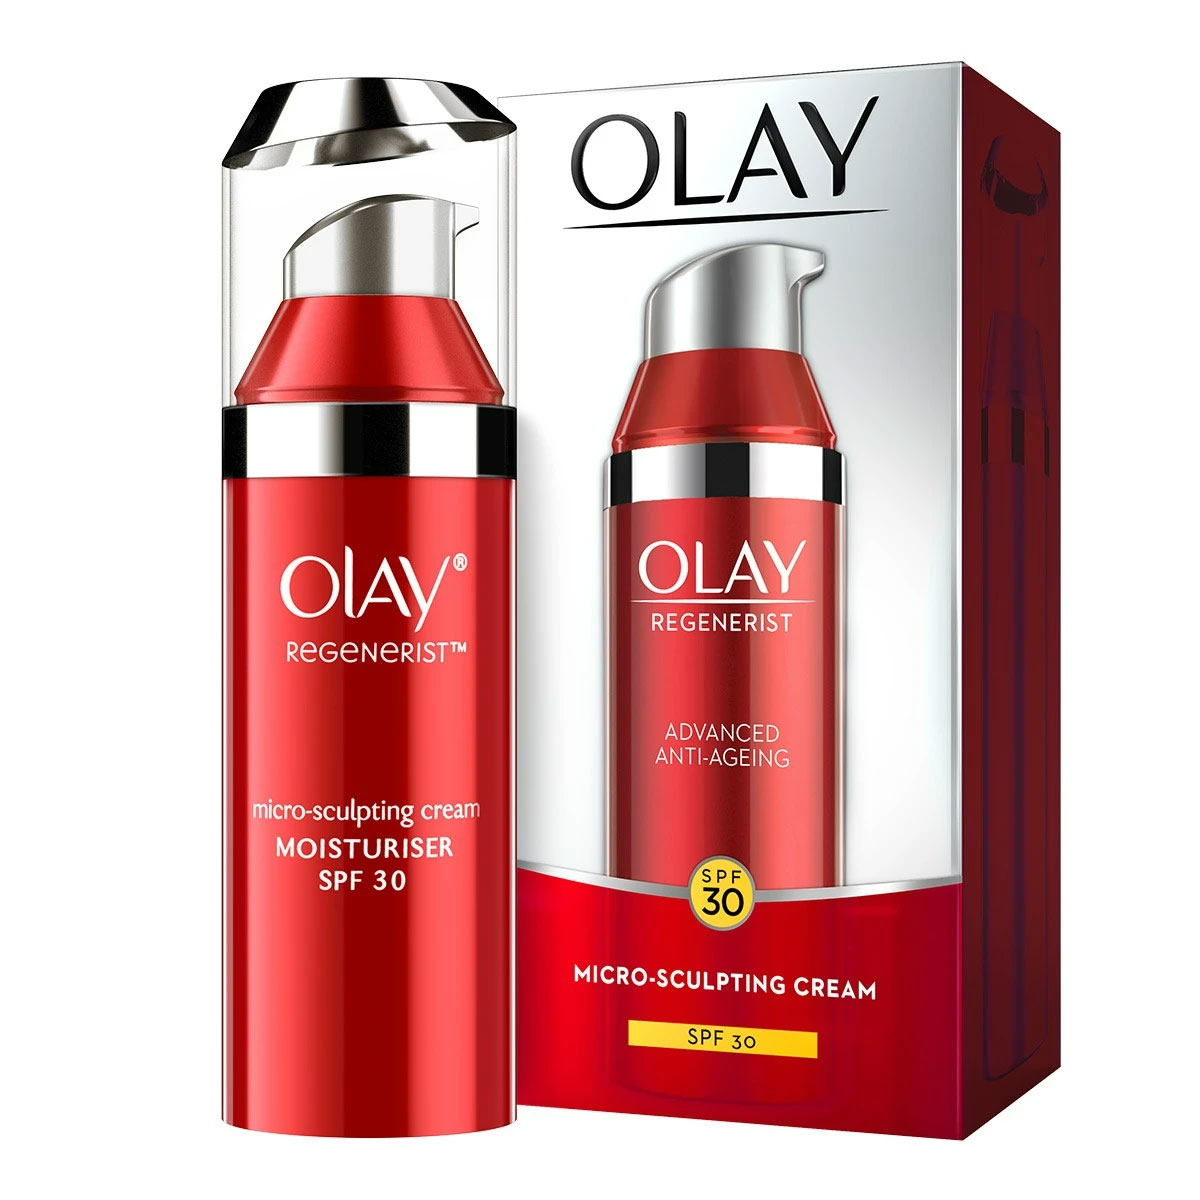 olay-skin-care-products-tips-for-all-skin-types